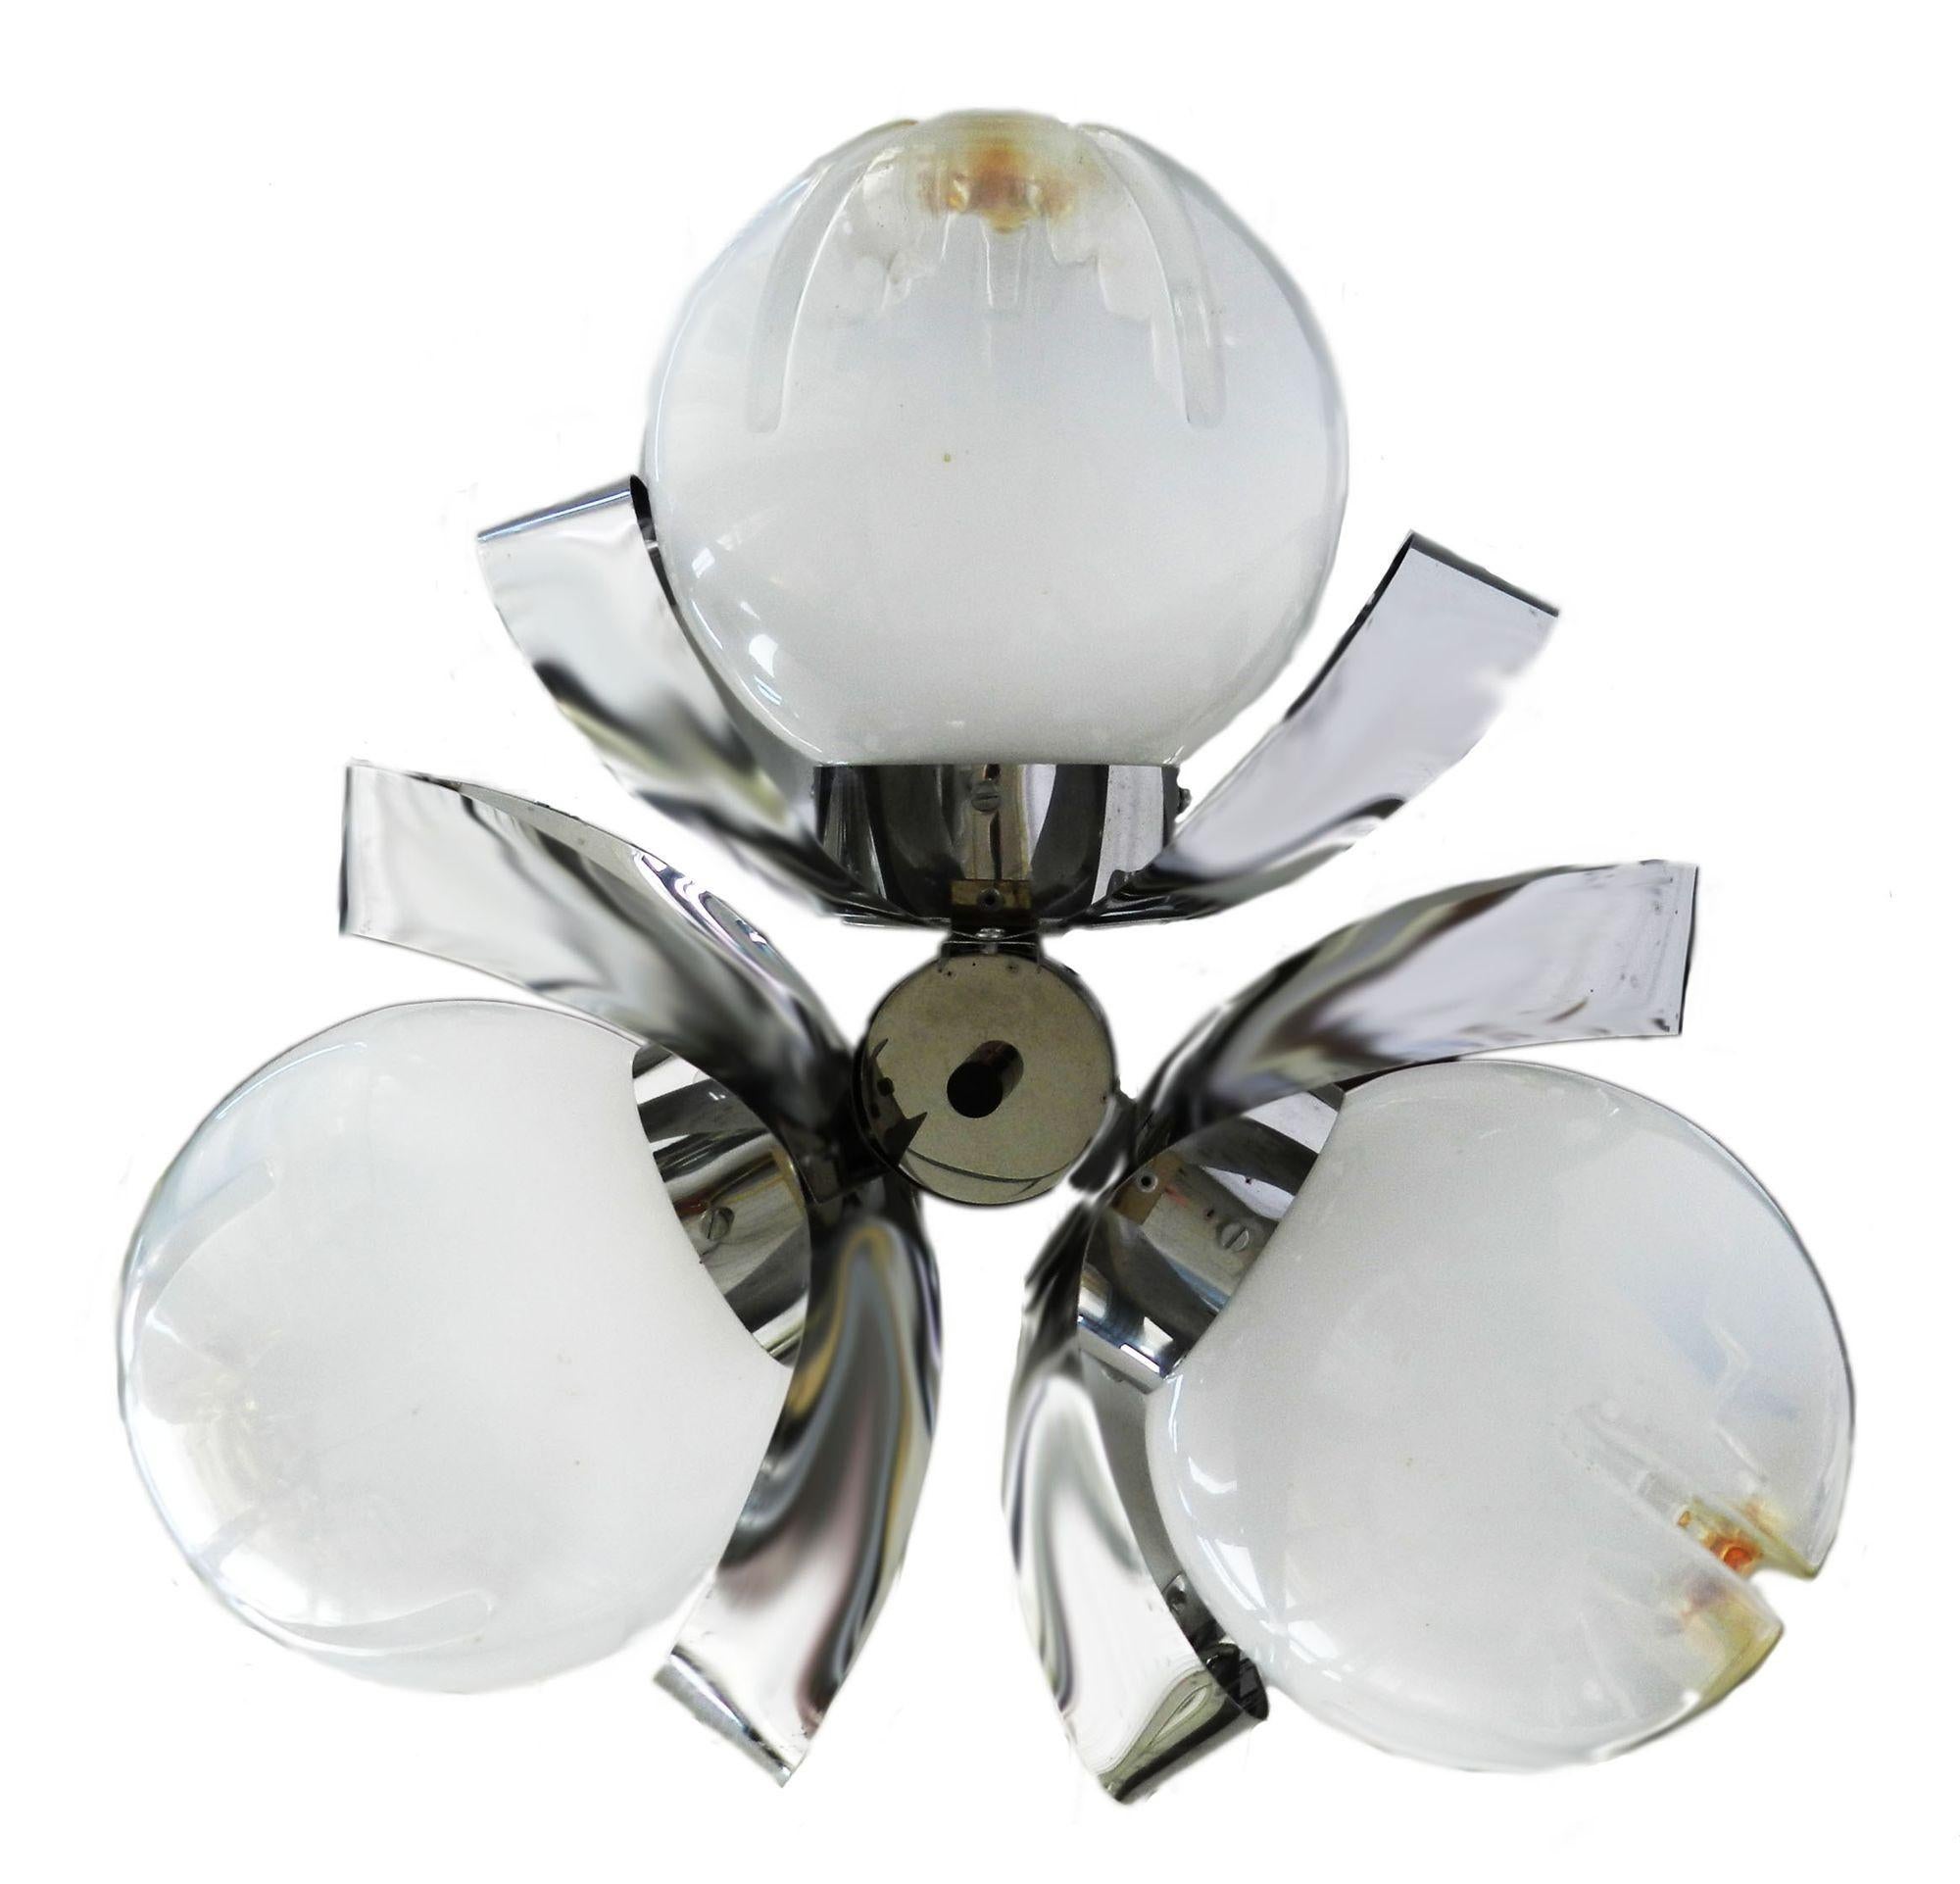 Mazzega Murano Pendant Light 3 Shades Sci Fi, circa 1970
Revised and restored to its Vintage Glory
This will be re-wired for US standards or EU & UK standards.